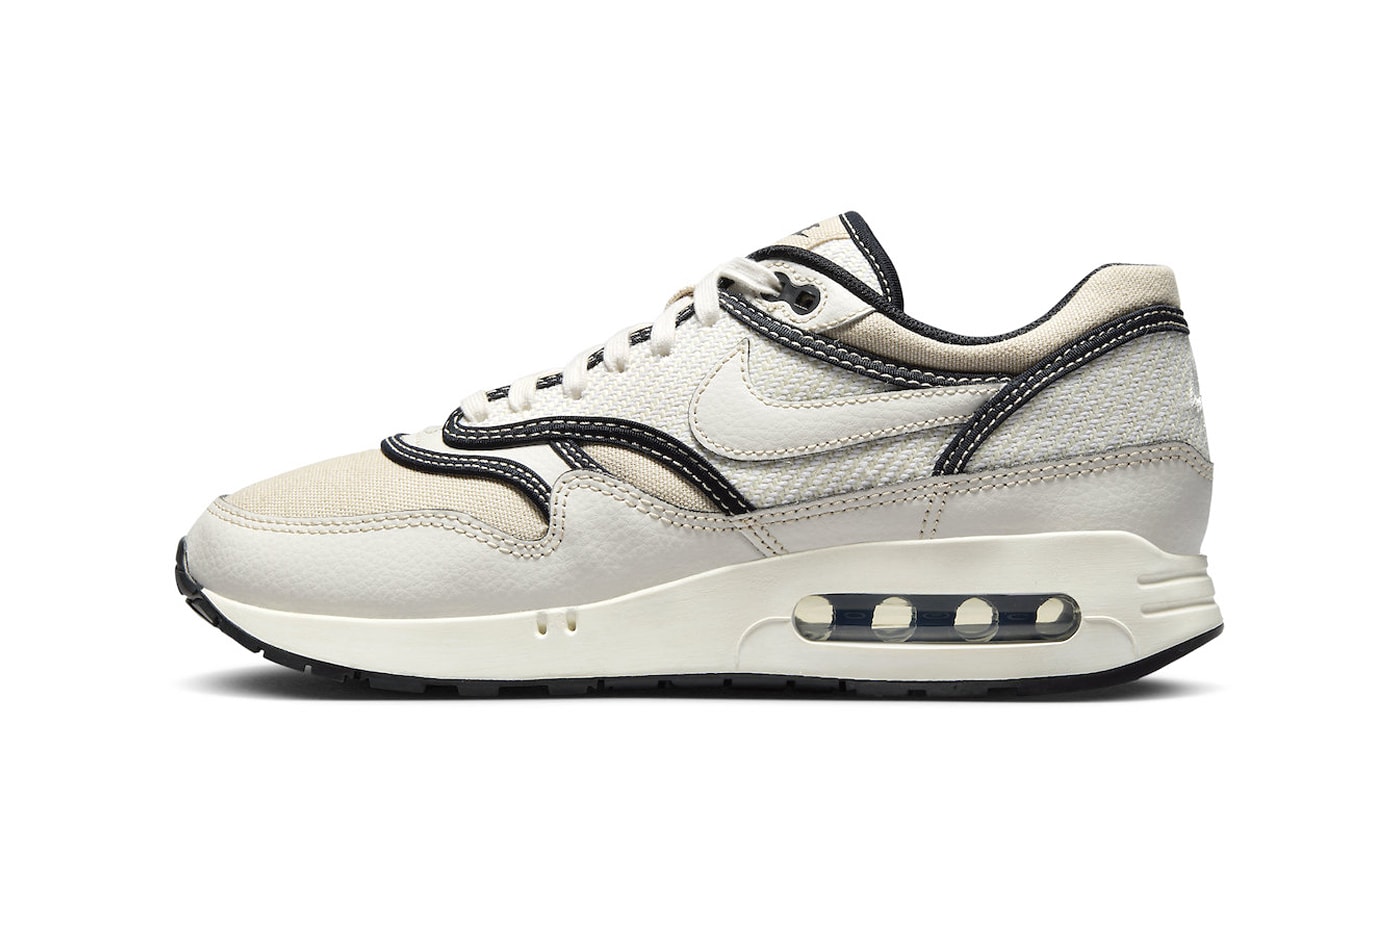 First Look at the Nike Air Max 1 '86 World Make nike korea mesh swoosh leather wardrobe staple white summer shoes